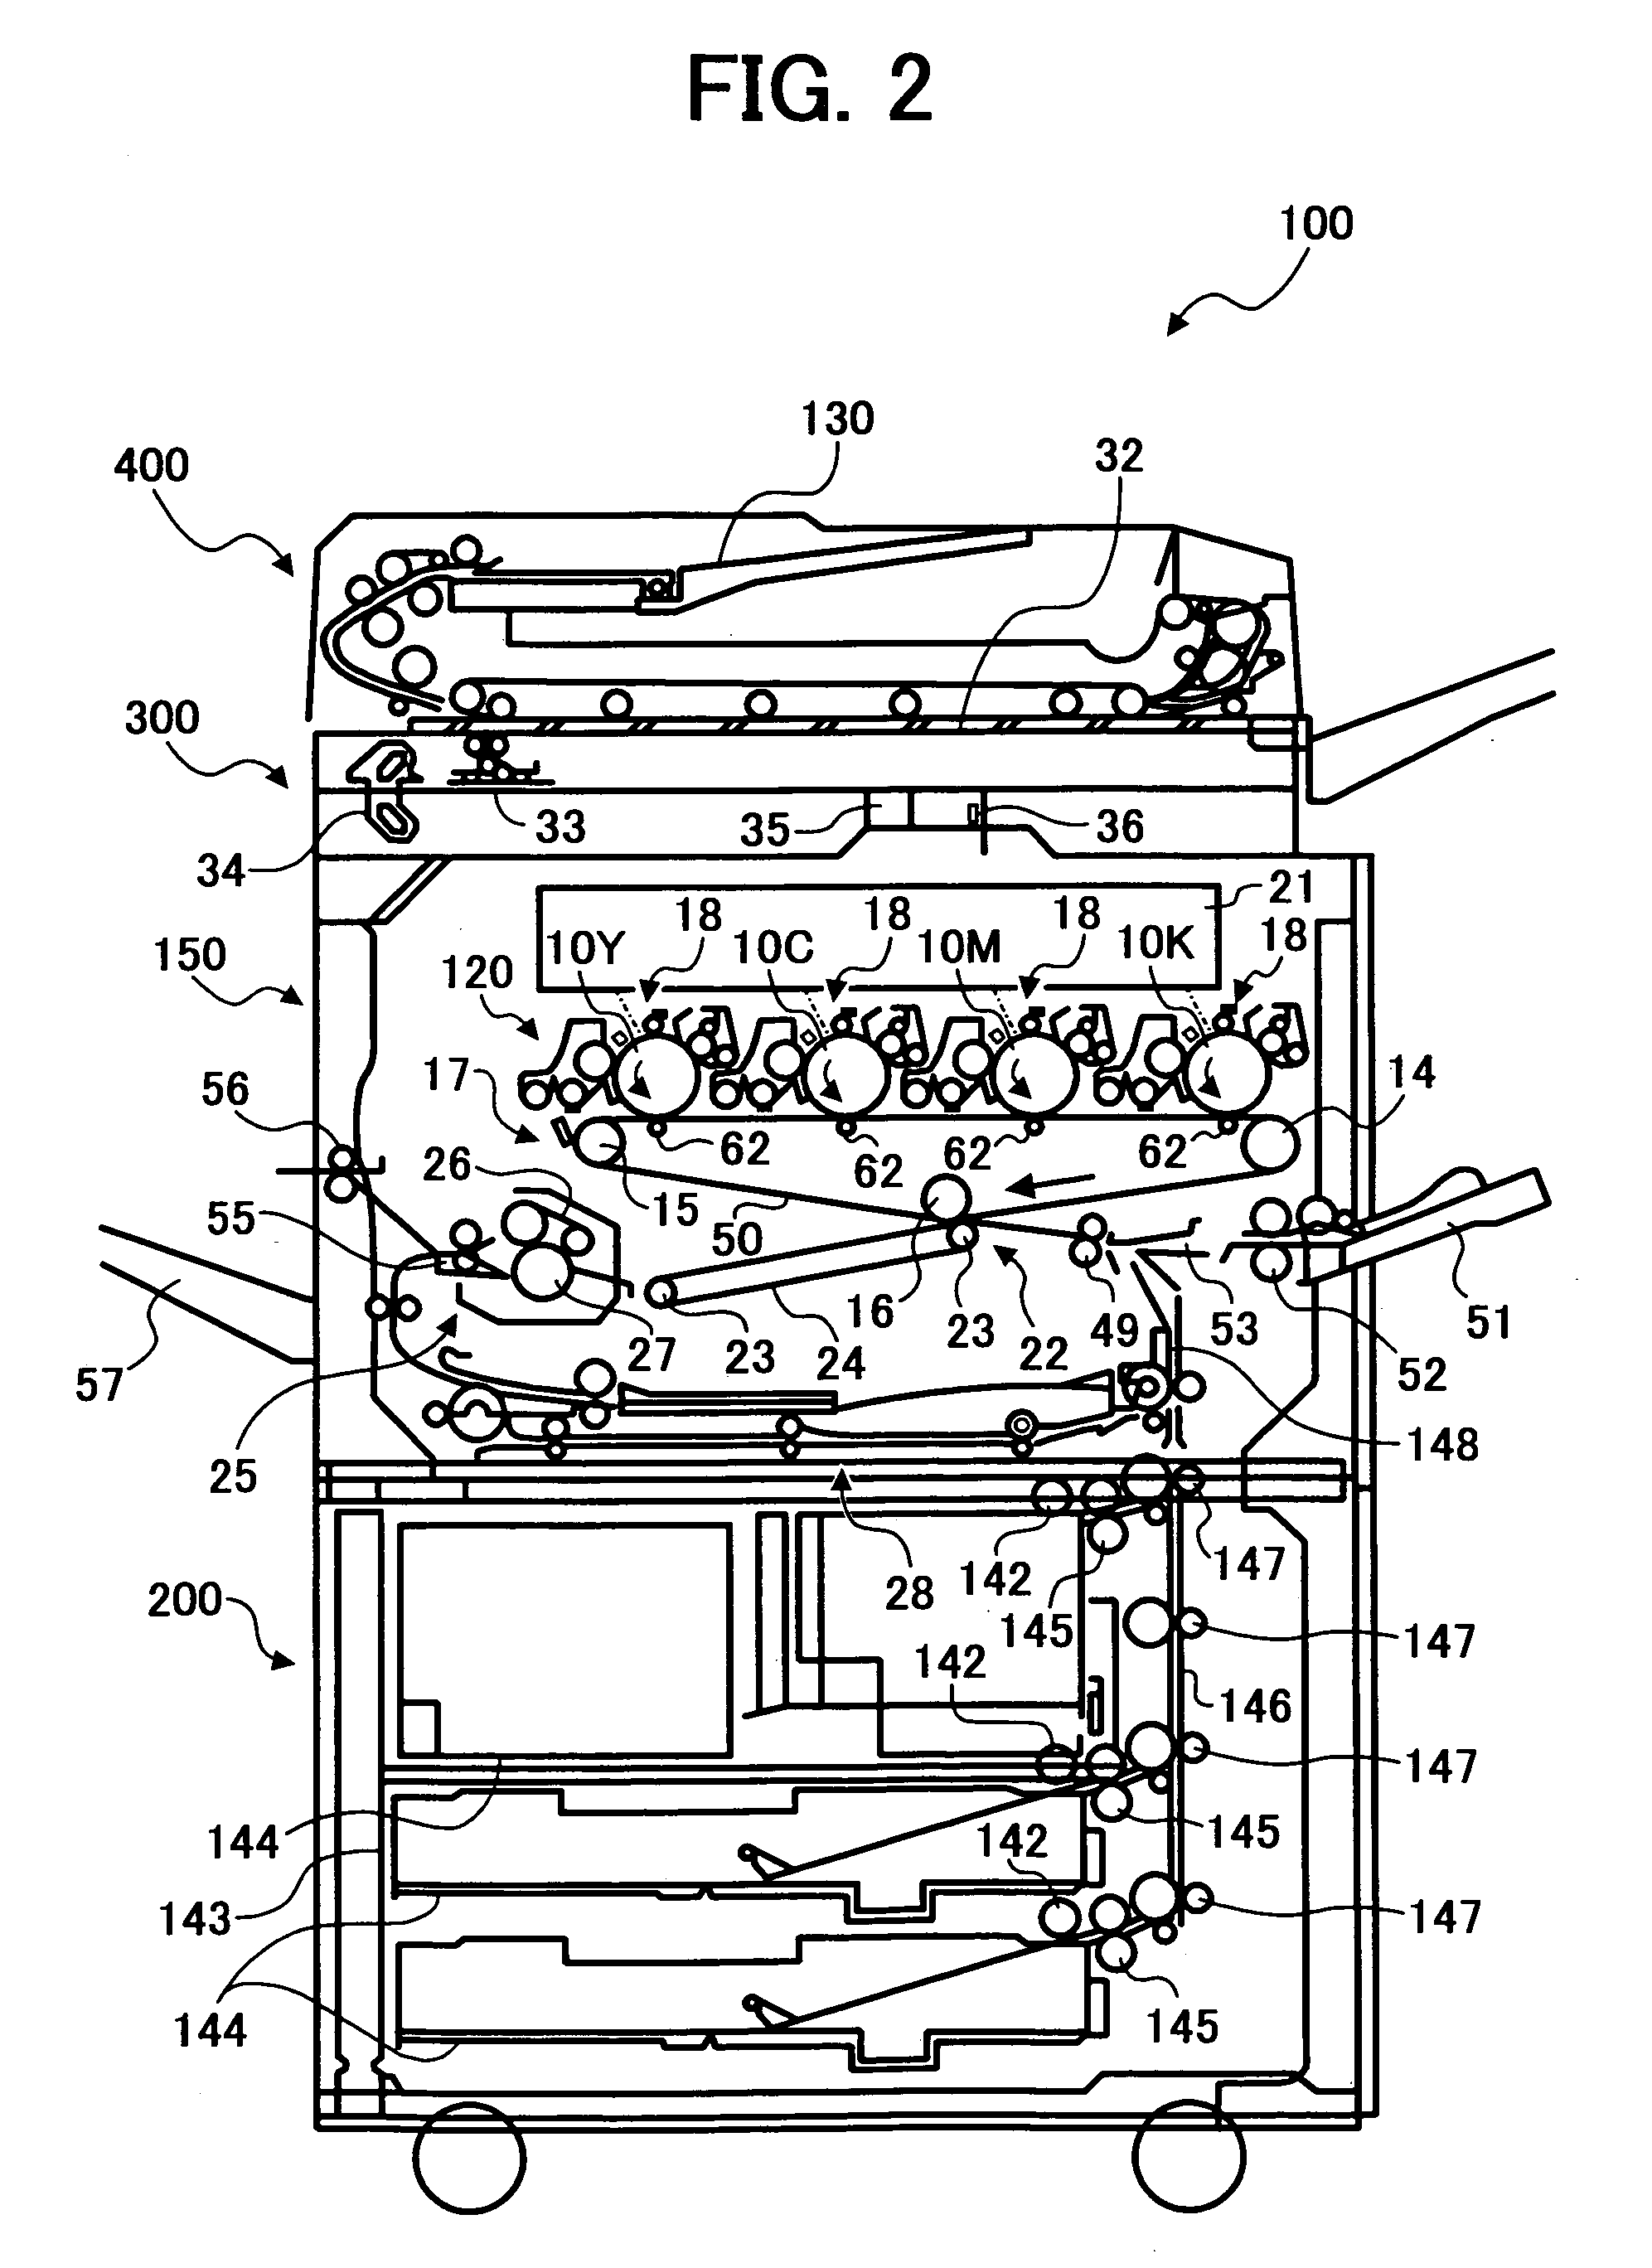 Toner and image forming method using the toner